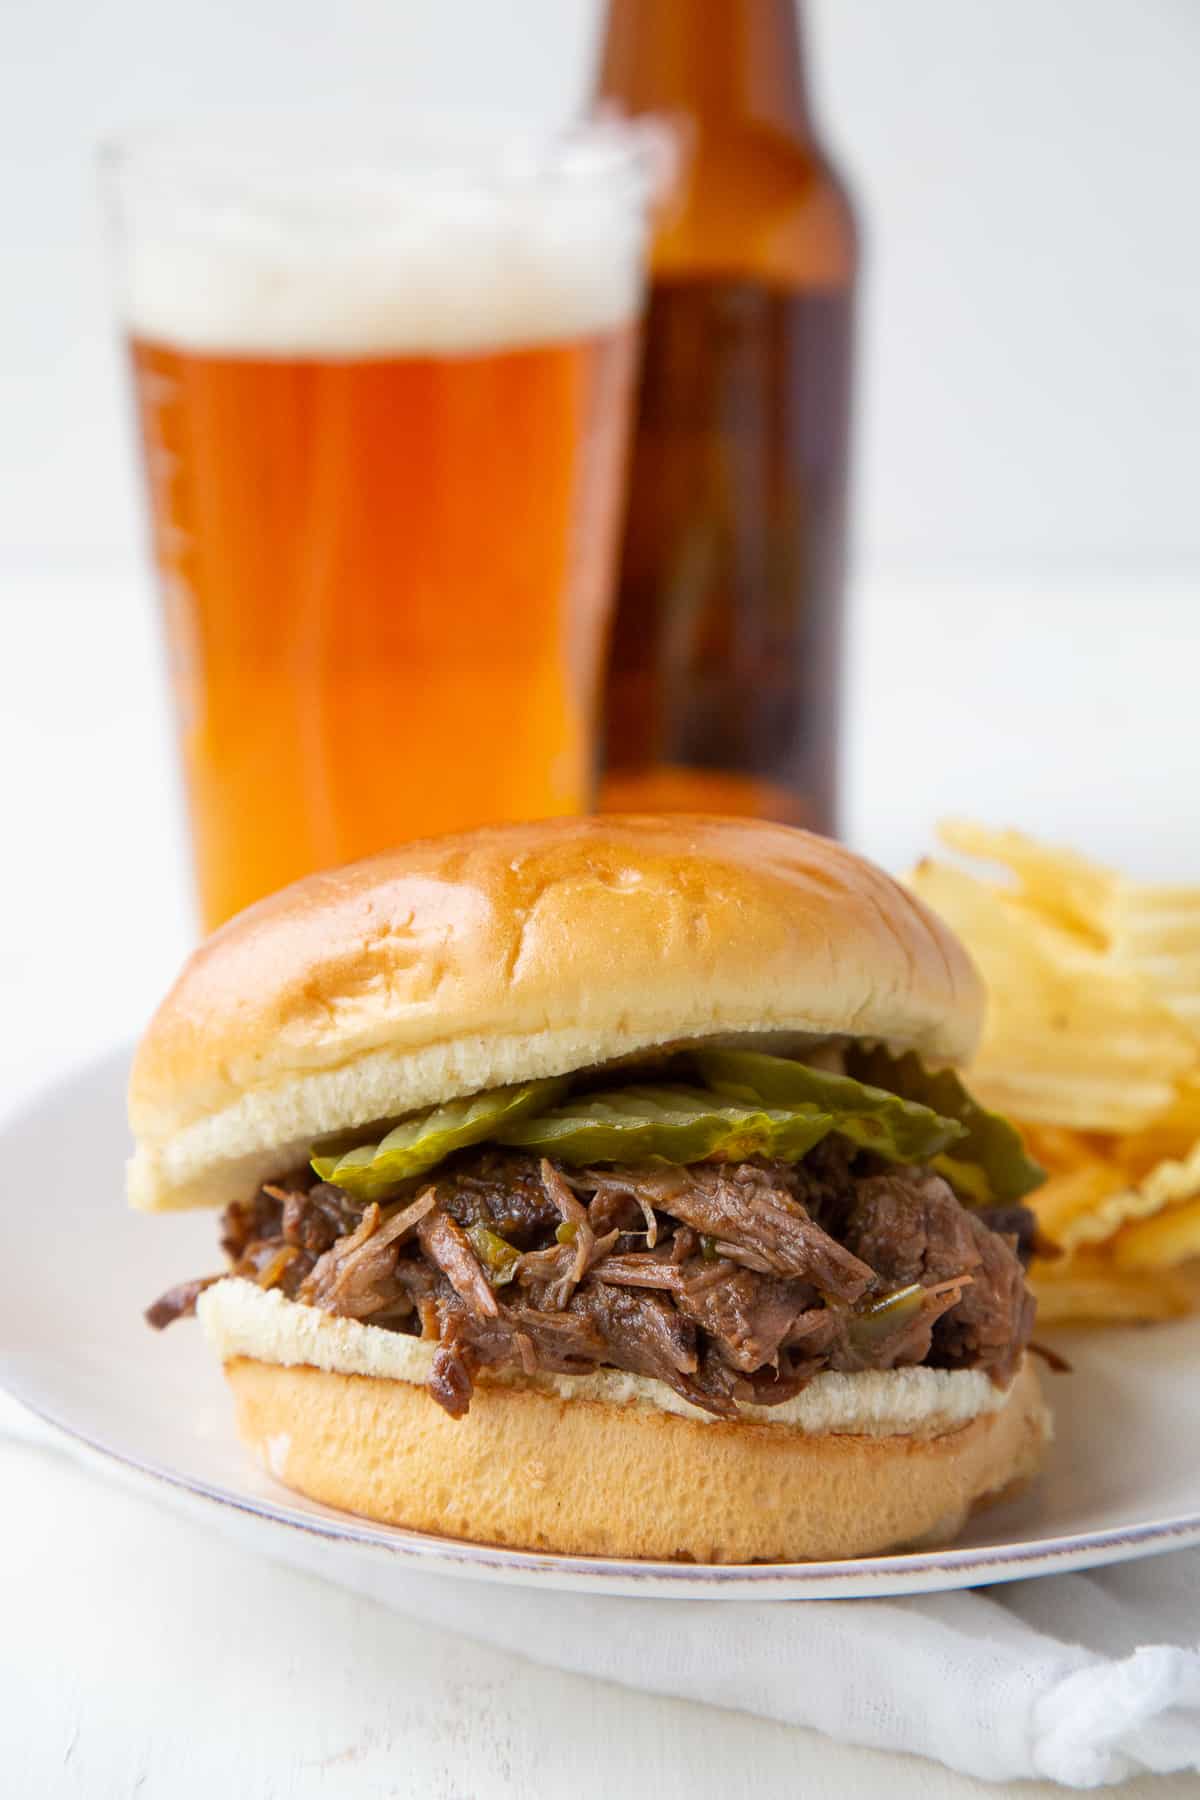 crockpot beef bbq sandwich on a white plate next to a pint glass of beer.